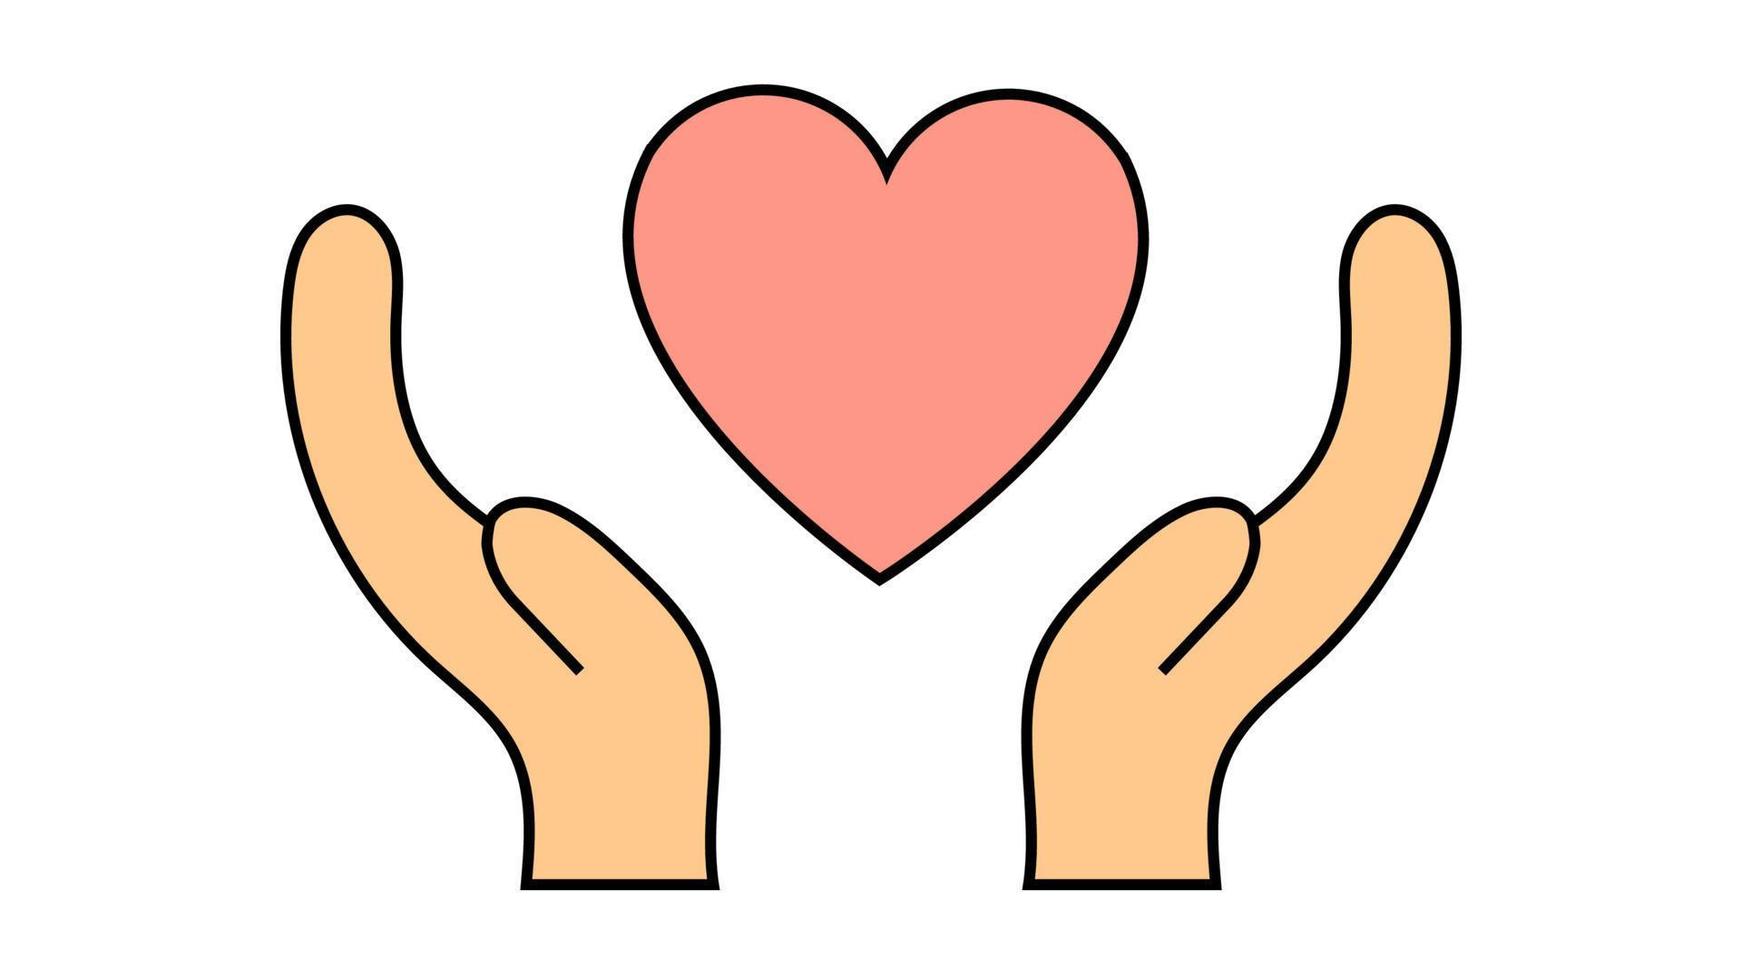 Simple flat icon beautiful hearts in hands for the feast of love, Valentine's Day or March 8th. Vector illustration